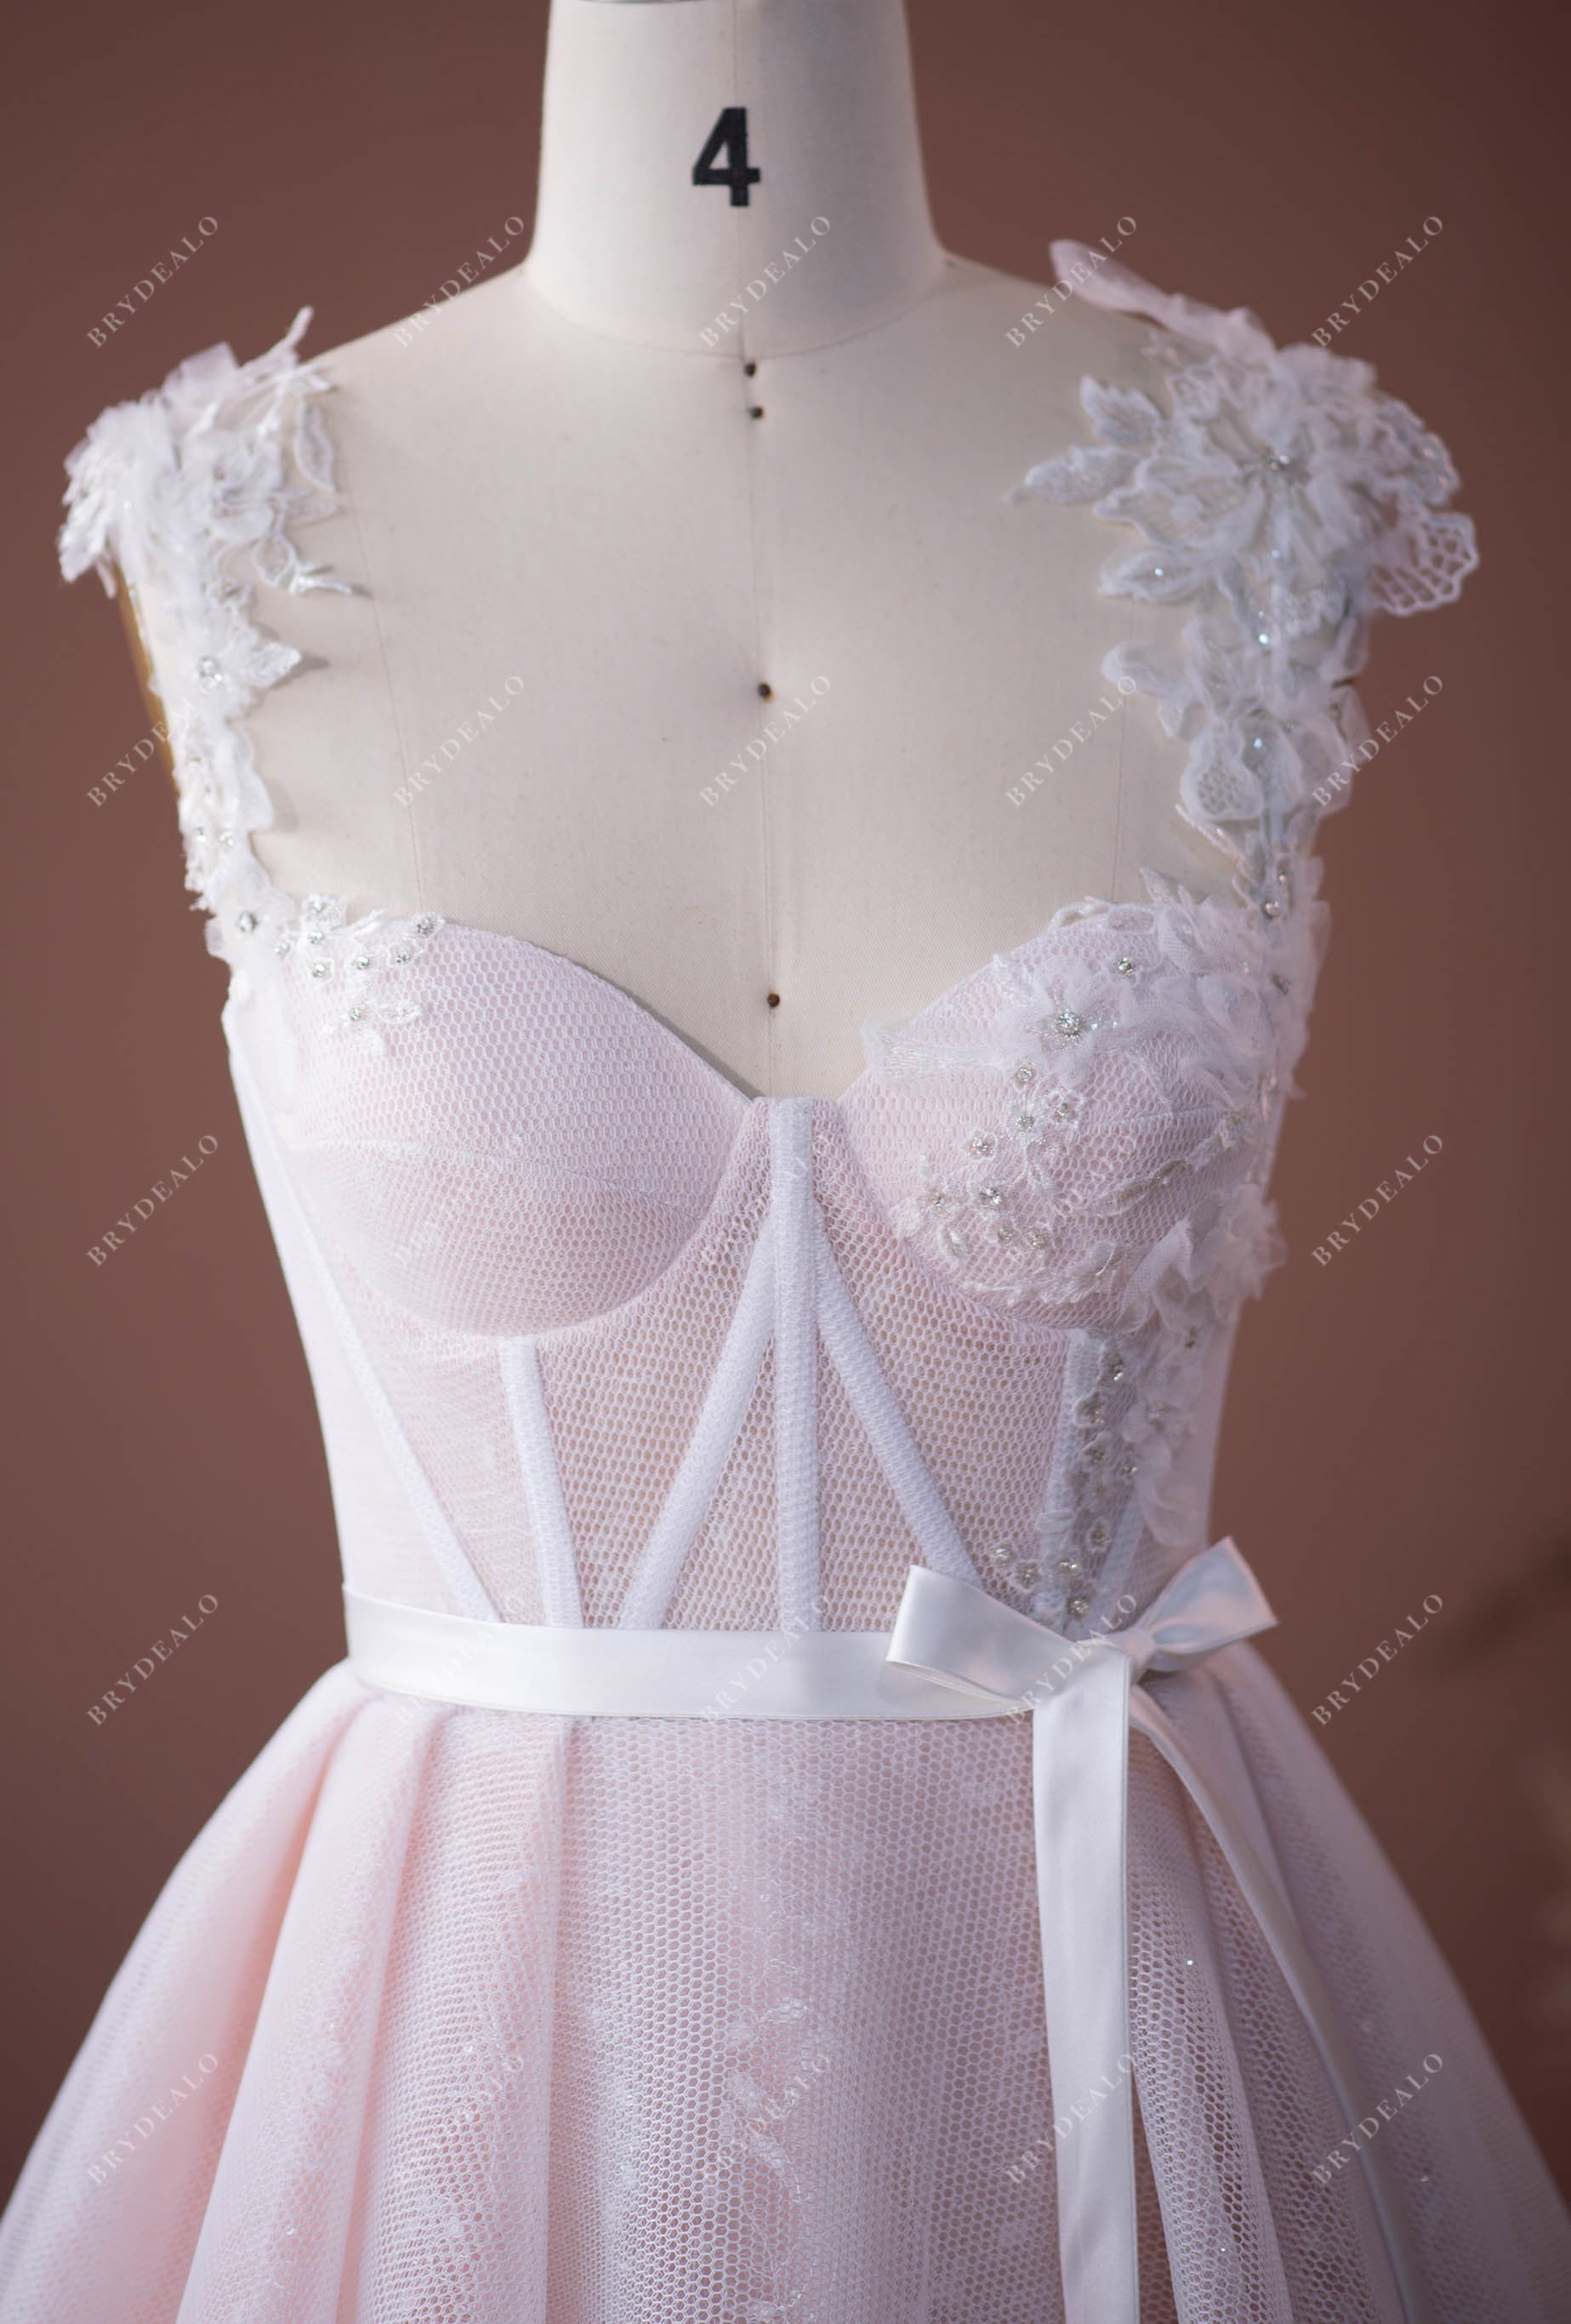 Wholesale Floral Straps Sweetheart Corset Bridal Gown Sample Sale